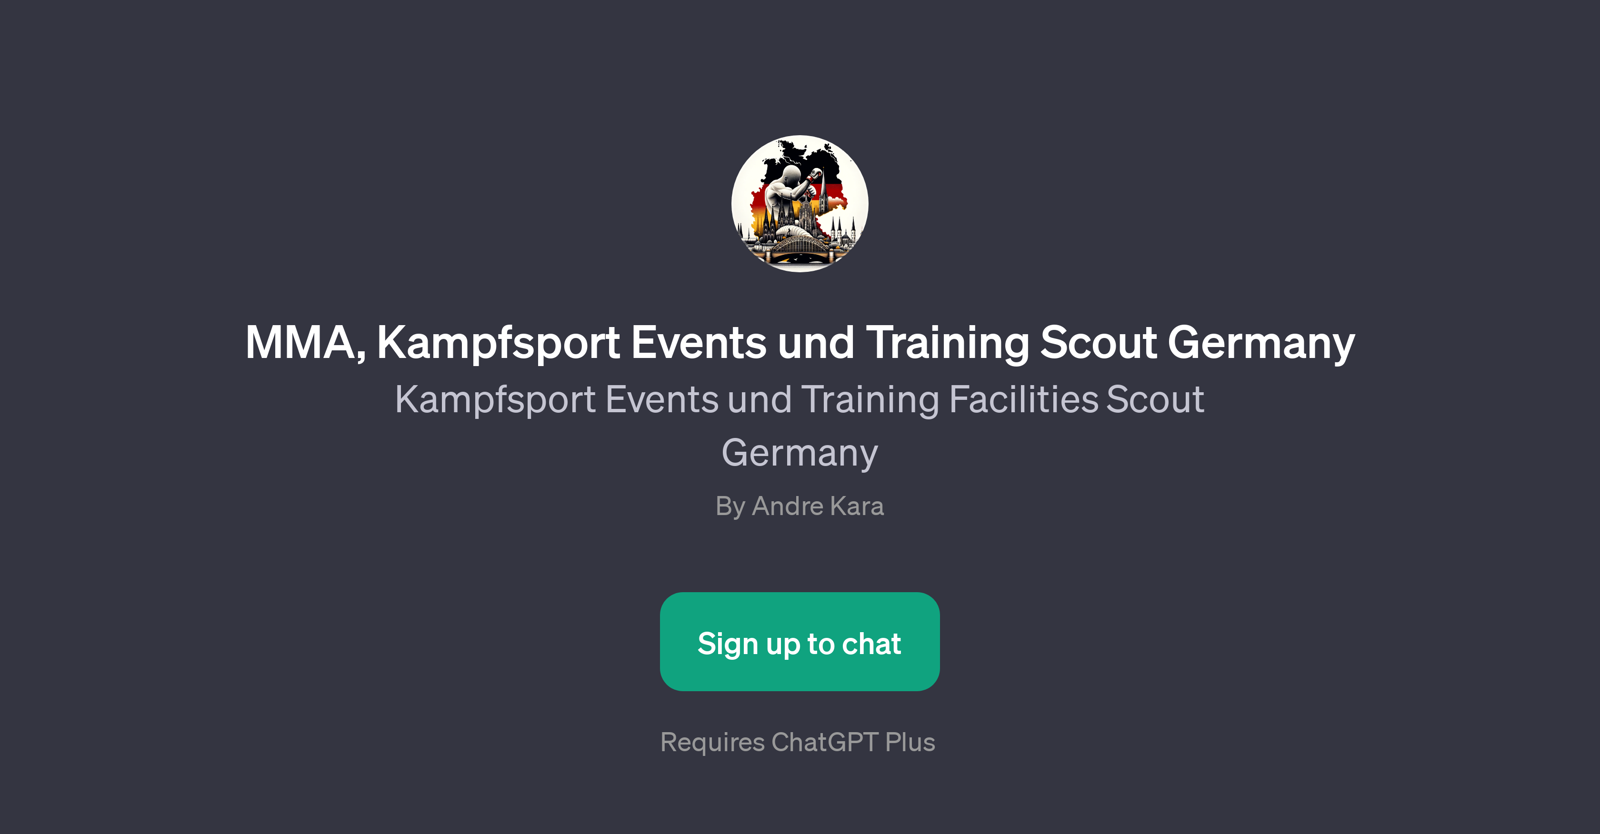 MMA, Kampfsport Events und Training Scout Germany website